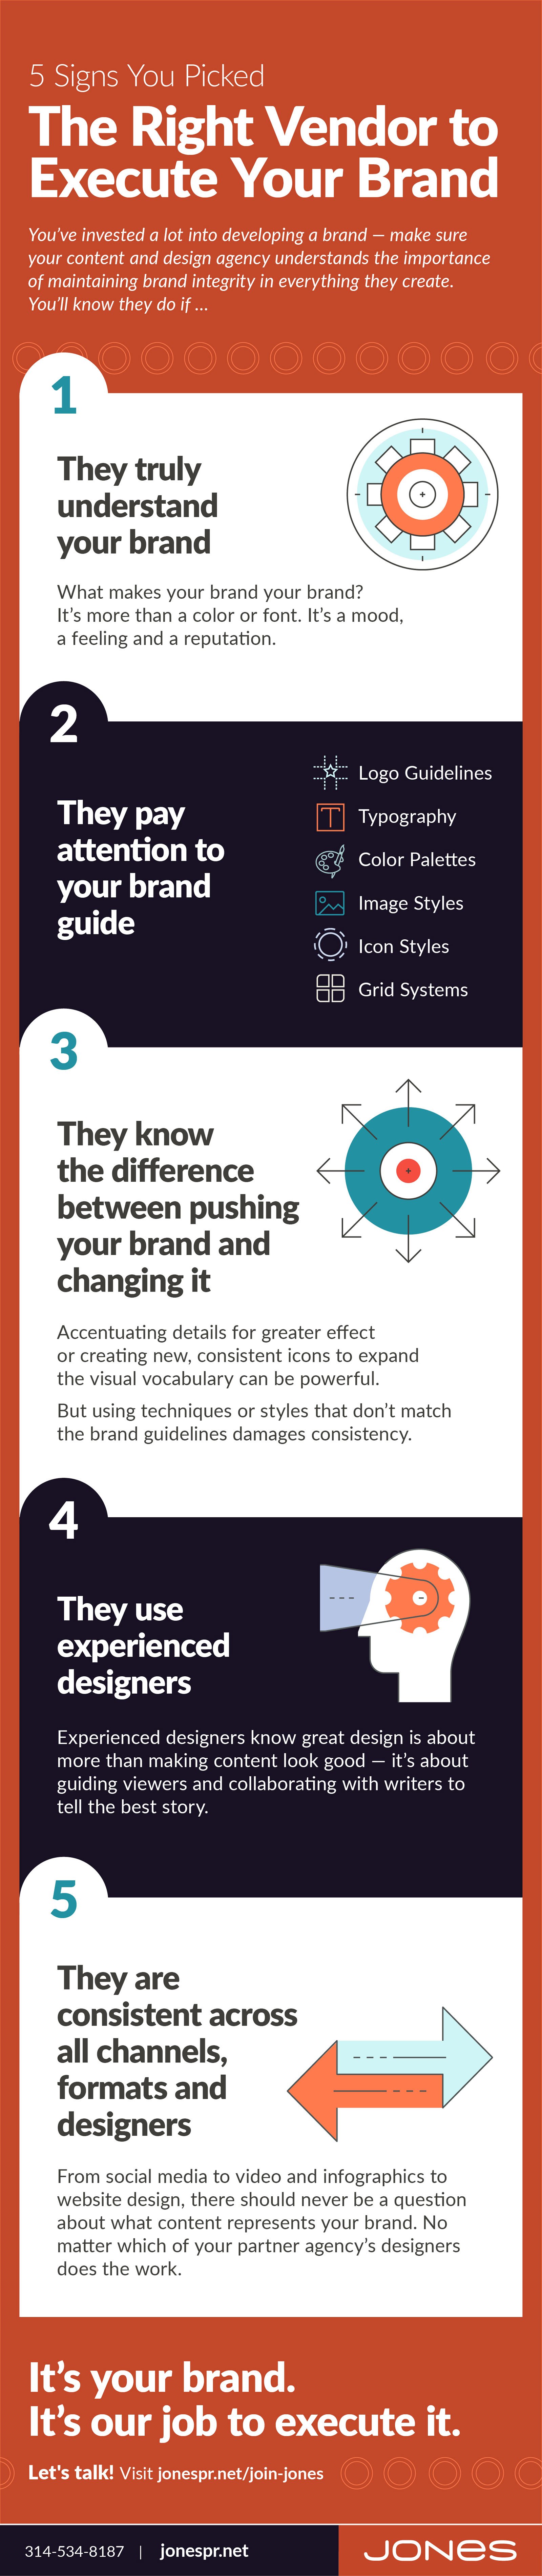 (Infographic) - 5 Ways You Know You Picked the Right Vendor to Execute Your Brand